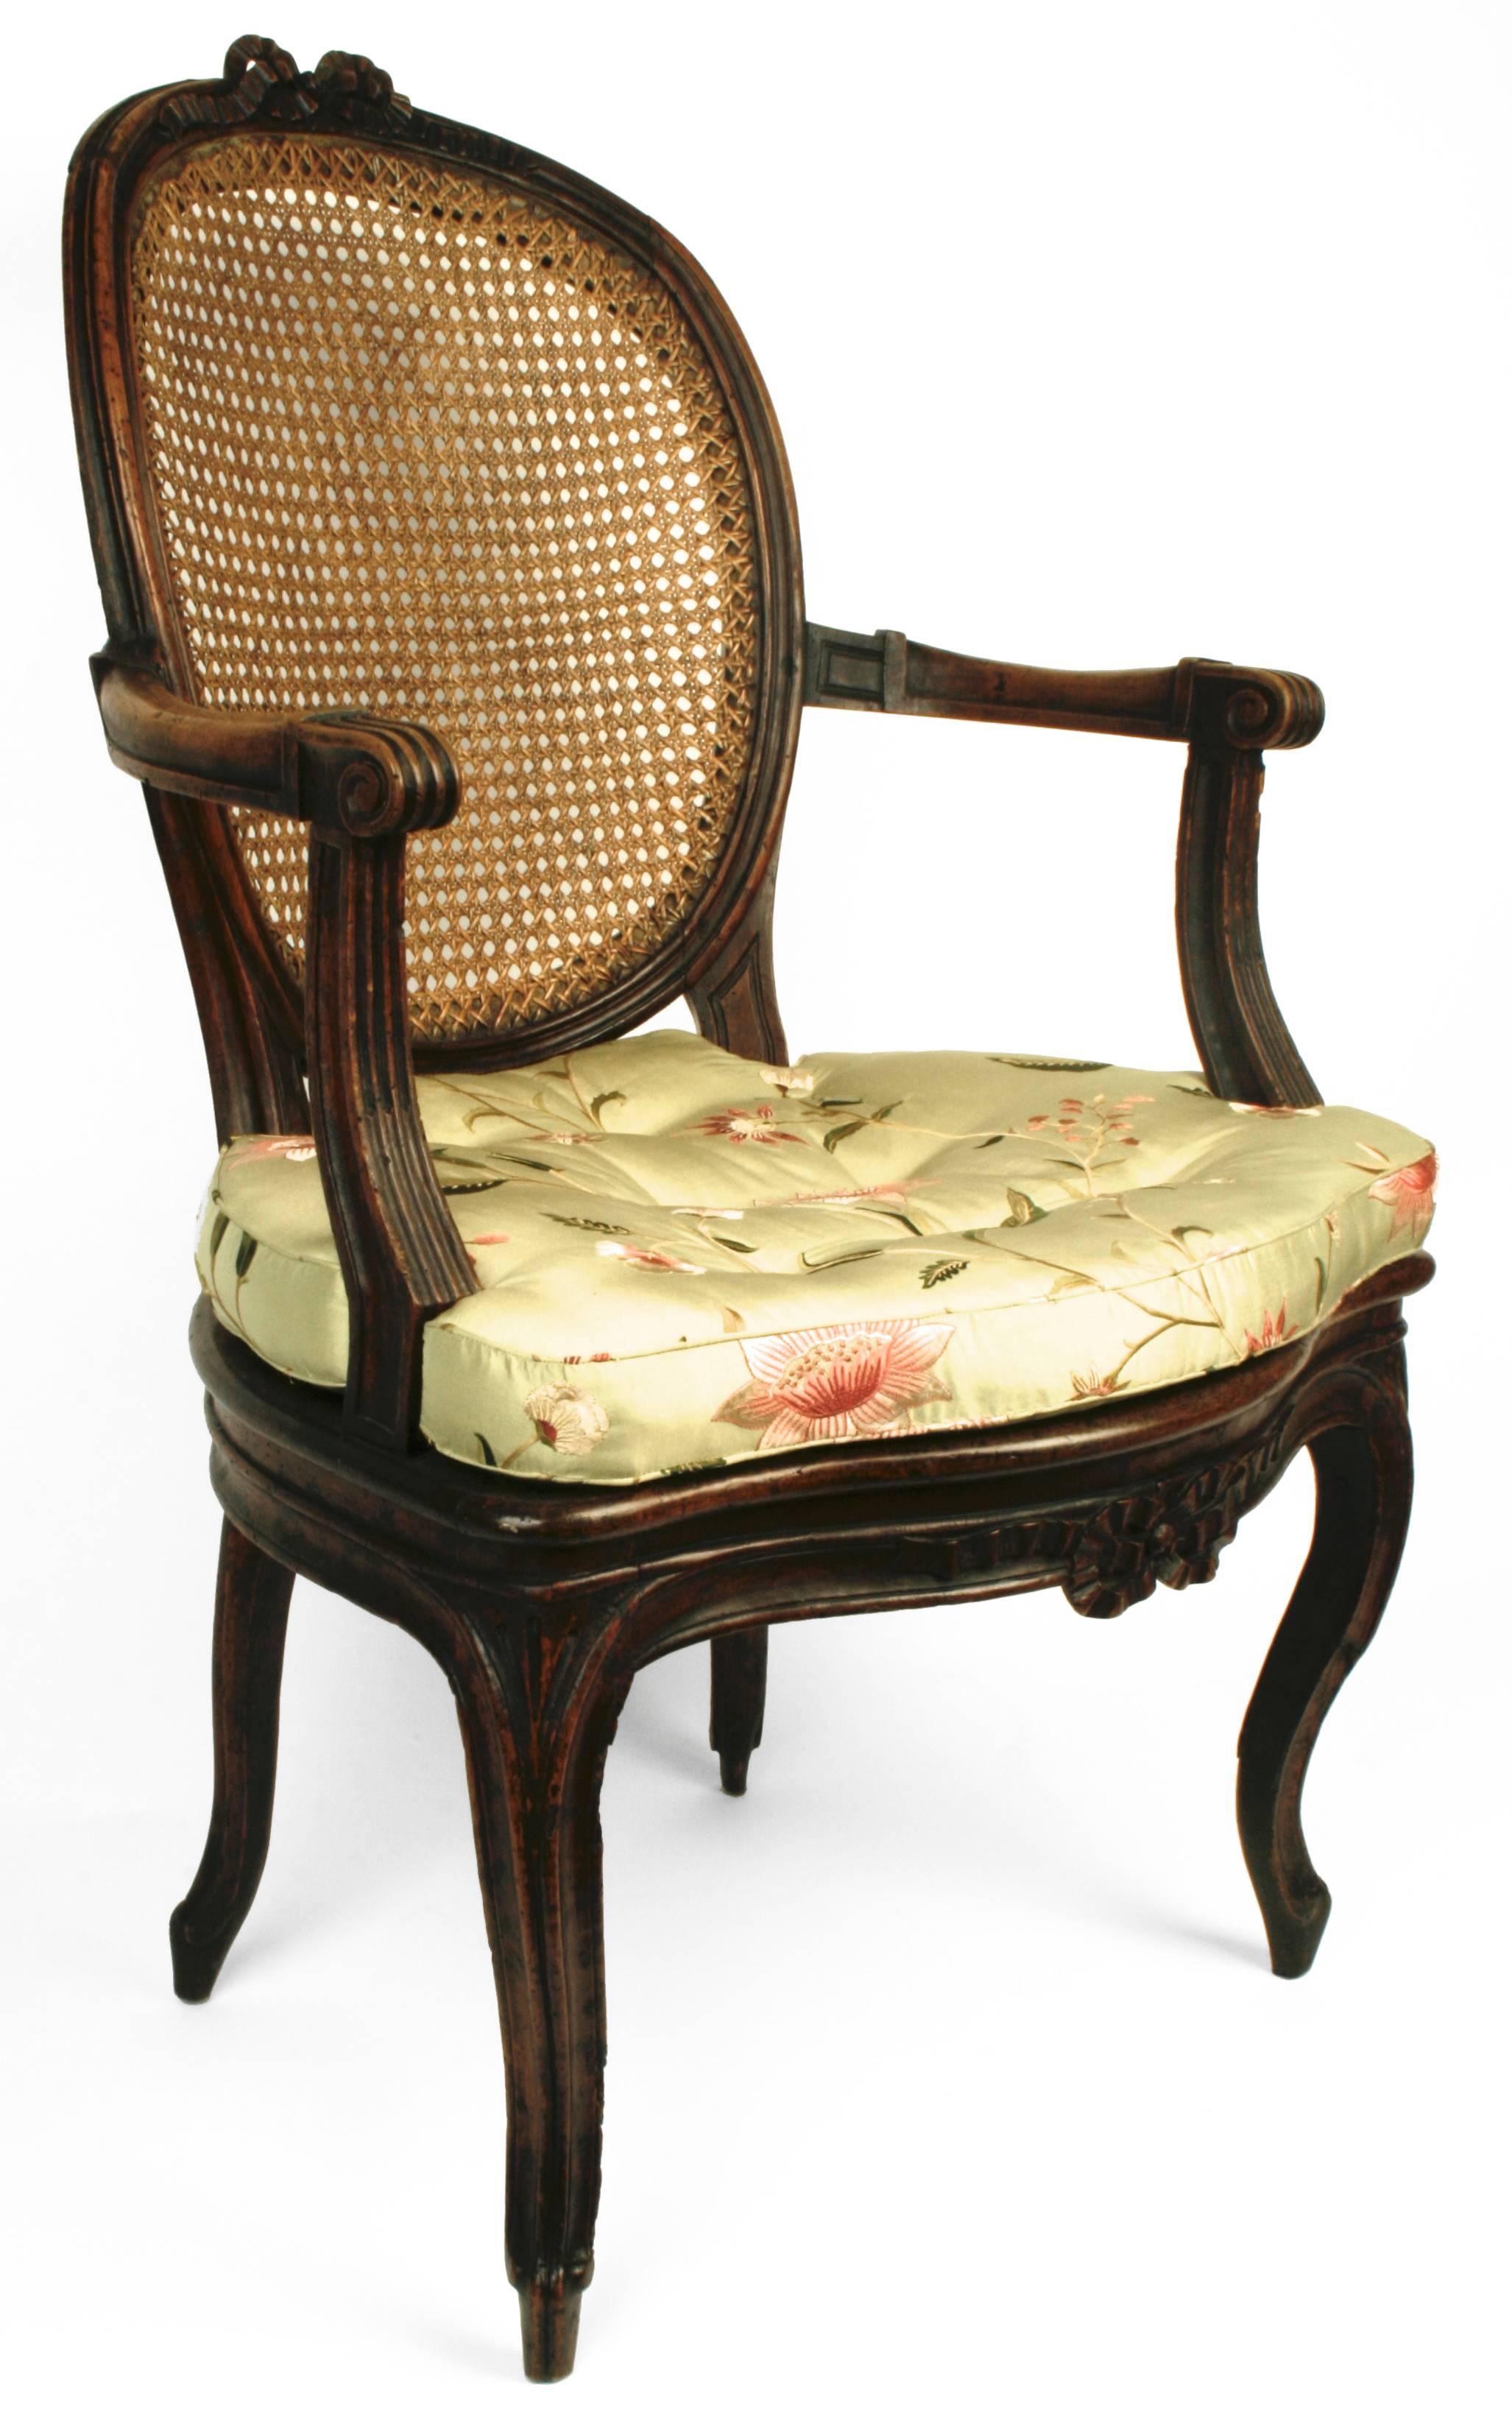 This very pretty armchair is made of walnut. It is open carved with bows centered on the crest rail and a matching one on the apron. It has soft scrolled arms and curving cabriolet legs. Both the oval back and the seat are caned with a custom